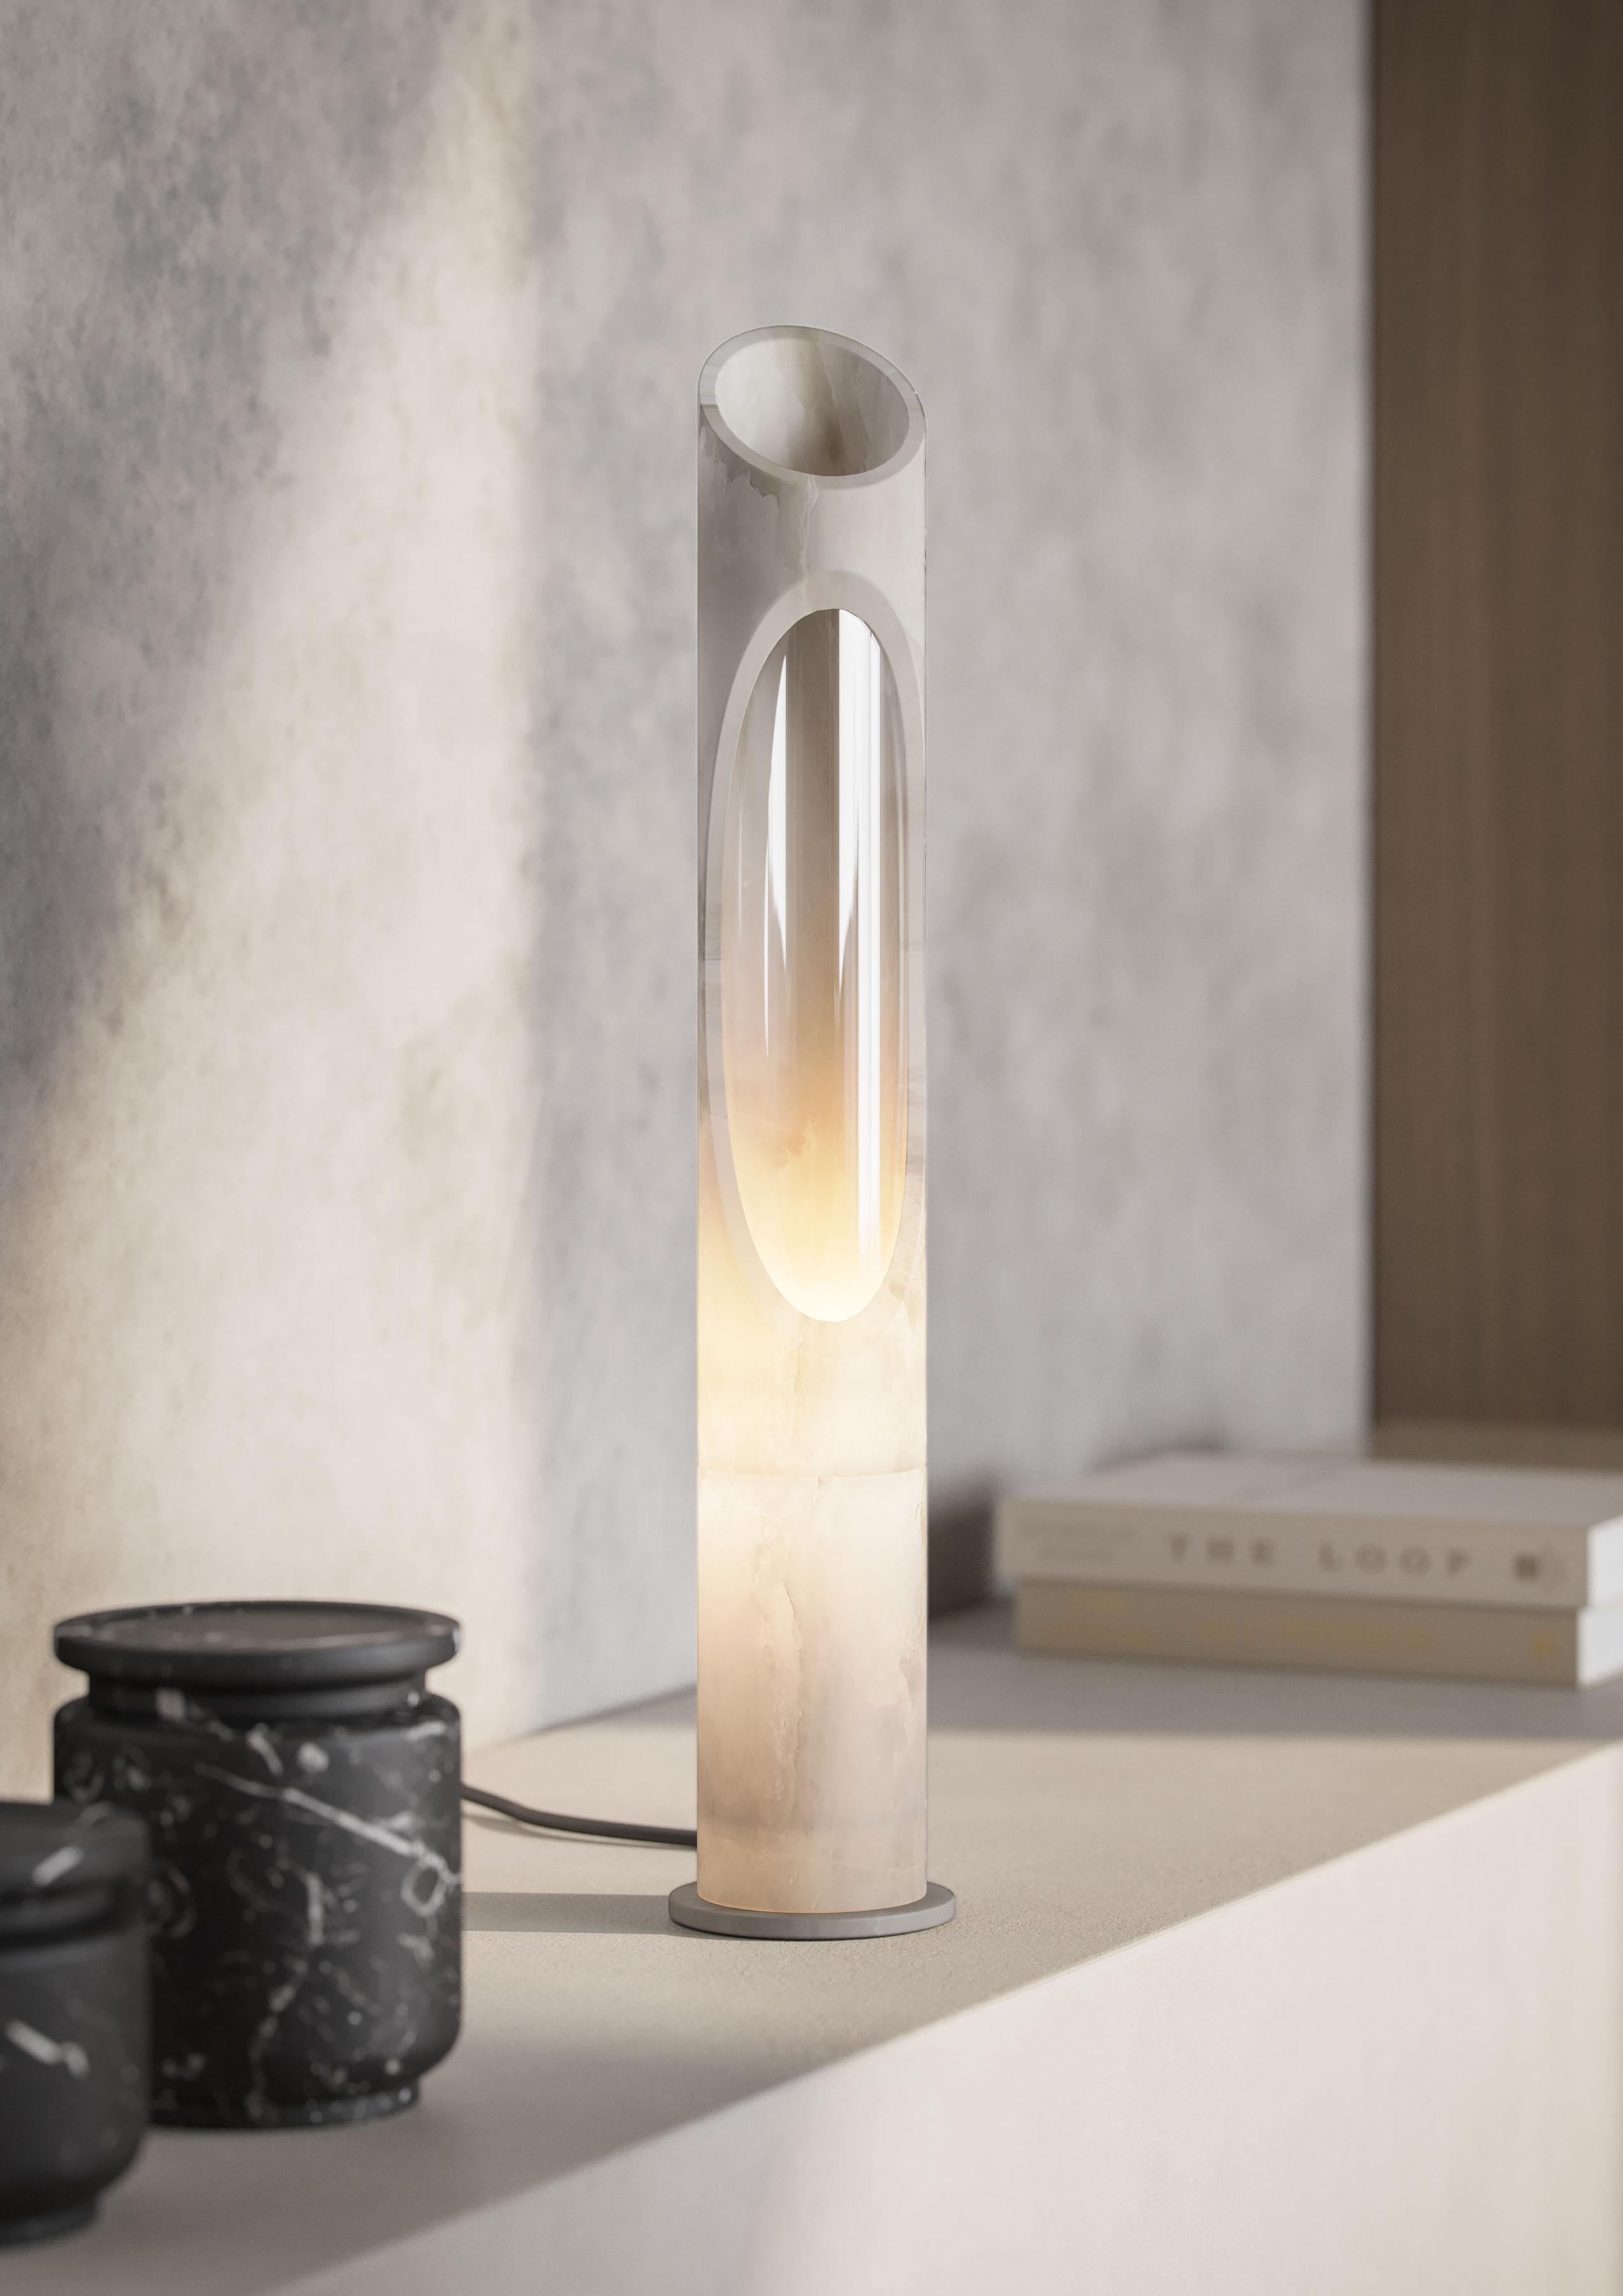 Lamp S in White Onyx Egeo marble, designed by Jacopo Simonetti.
Available also in Pink Egeo, White Arabescato, Black Marquinia marble and in the L version. 

Armonia Collection: Inspired by the captivating image that two contrasting elements can